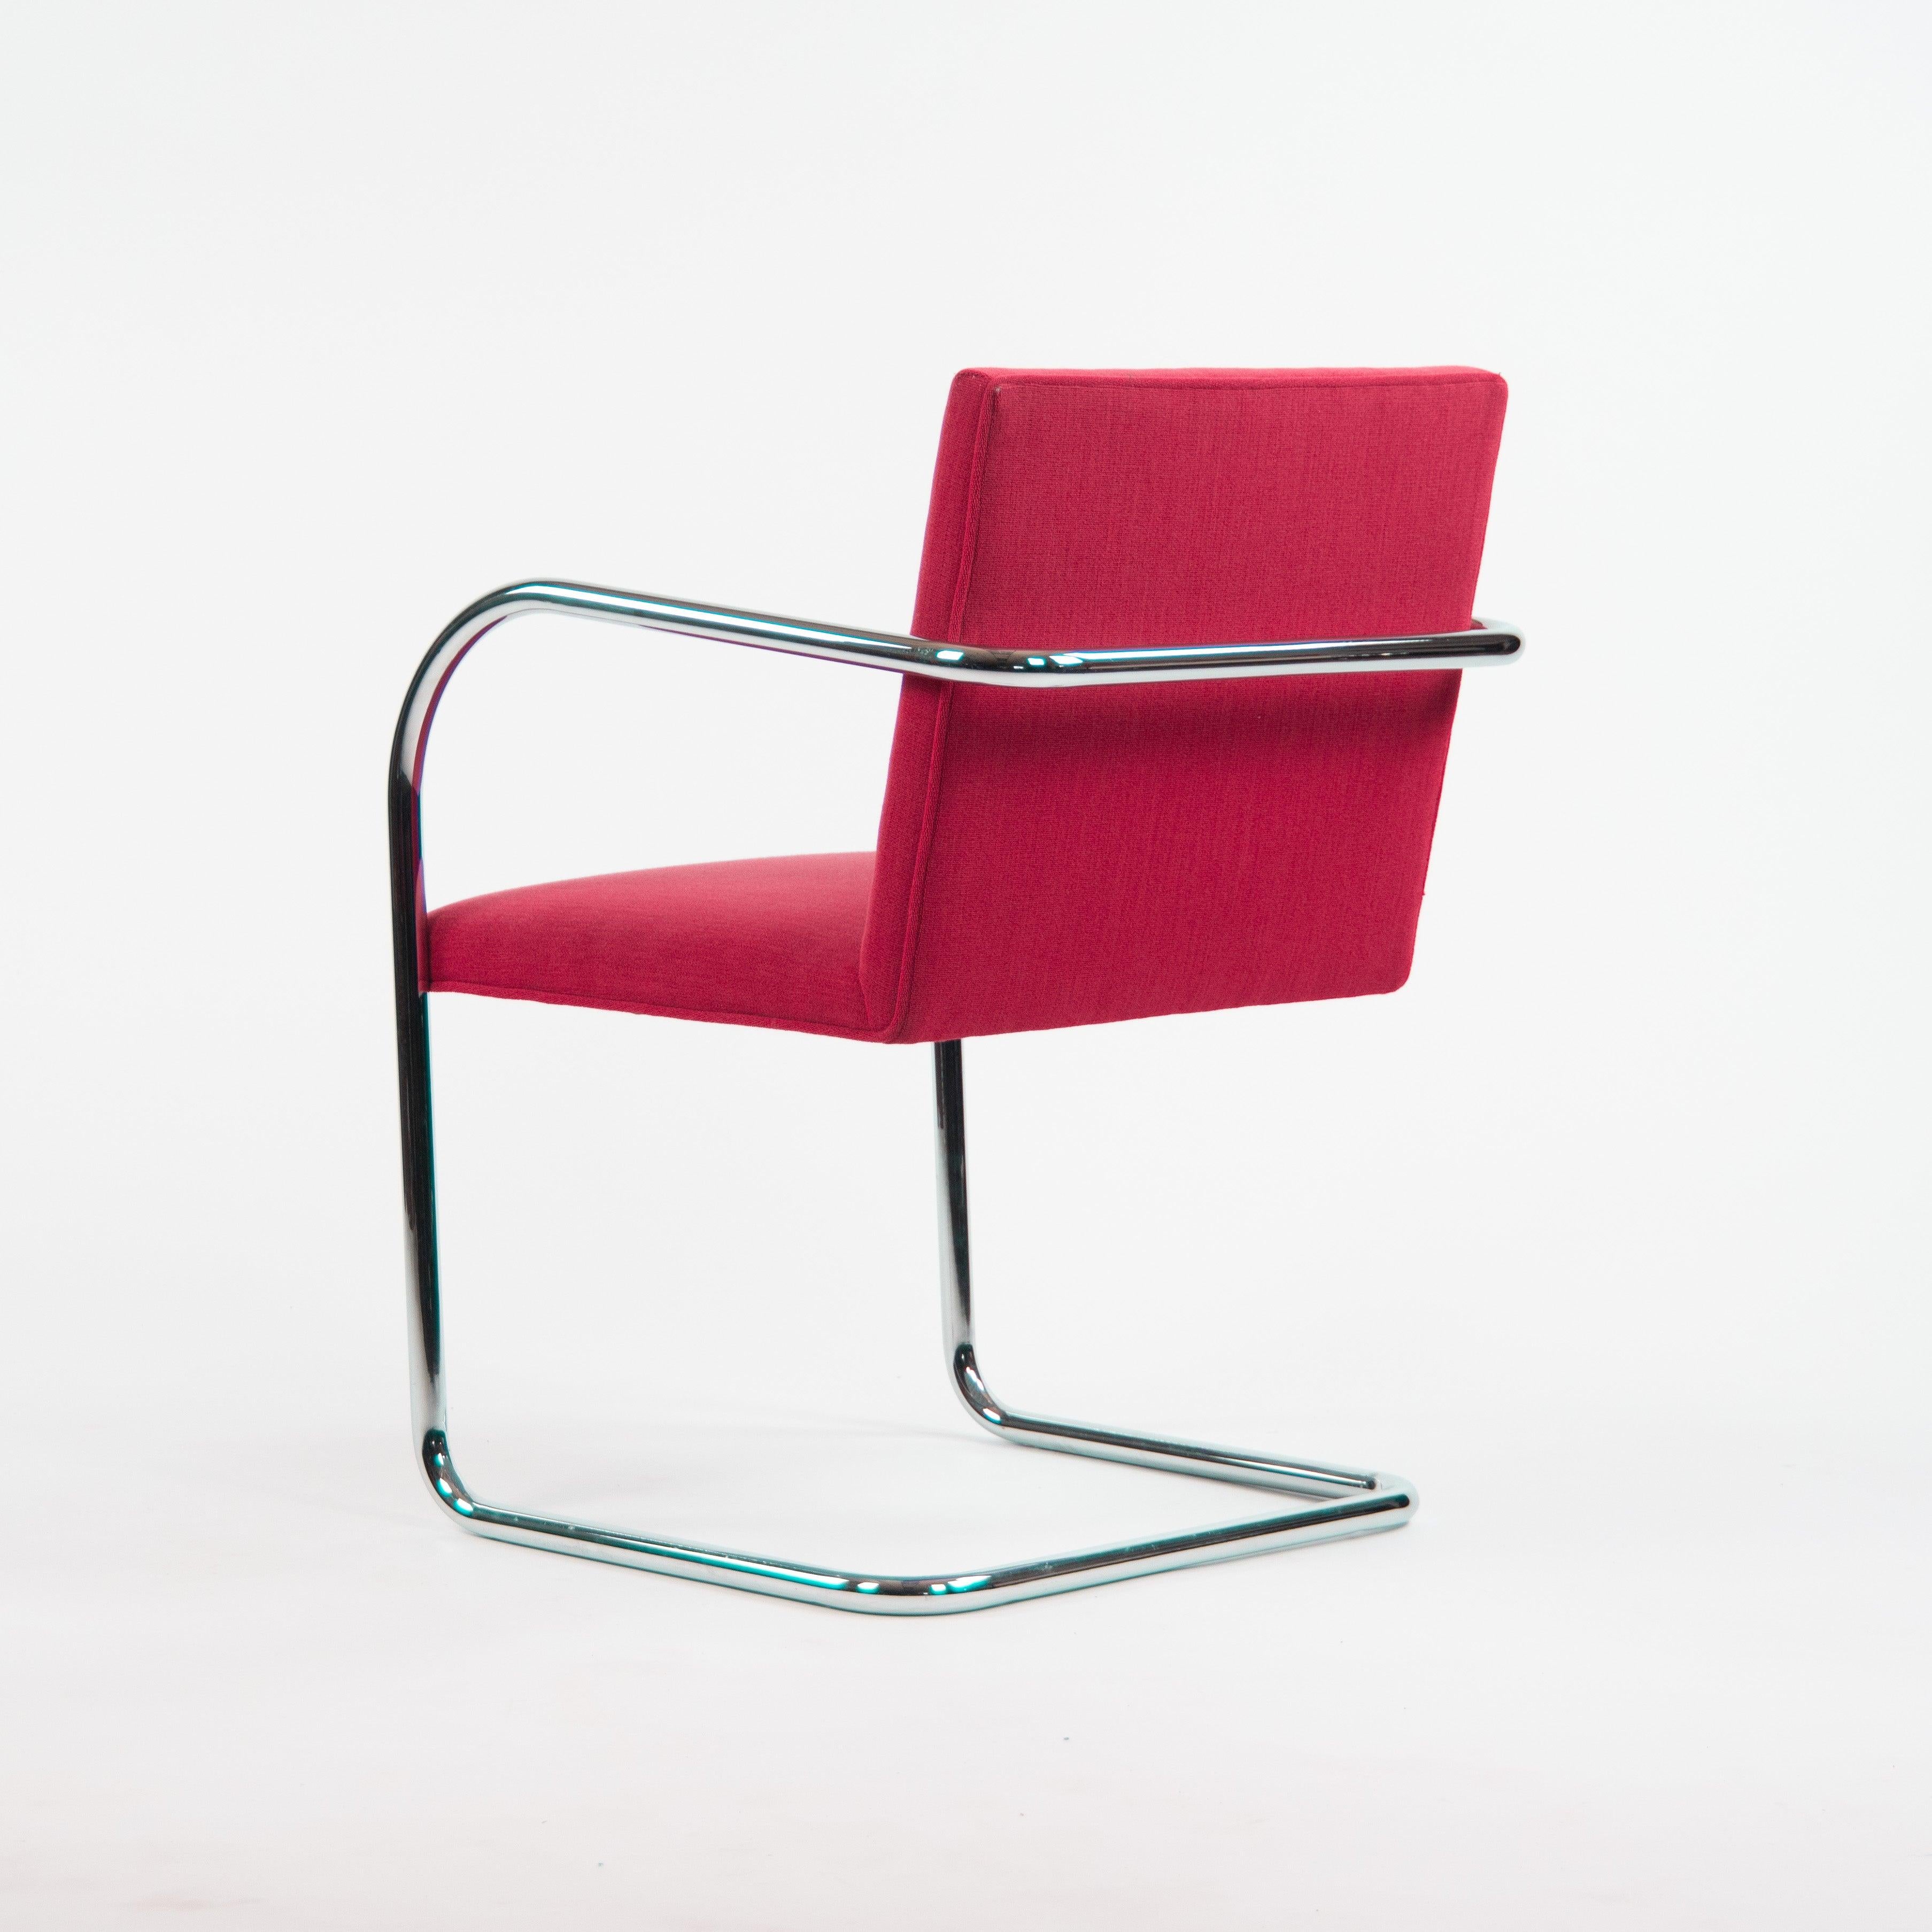 2010 Mies van der Rohe for Knoll Brno Tubular Chrome Dining / Arm Chairs In Good Condition For Sale In Philadelphia, PA